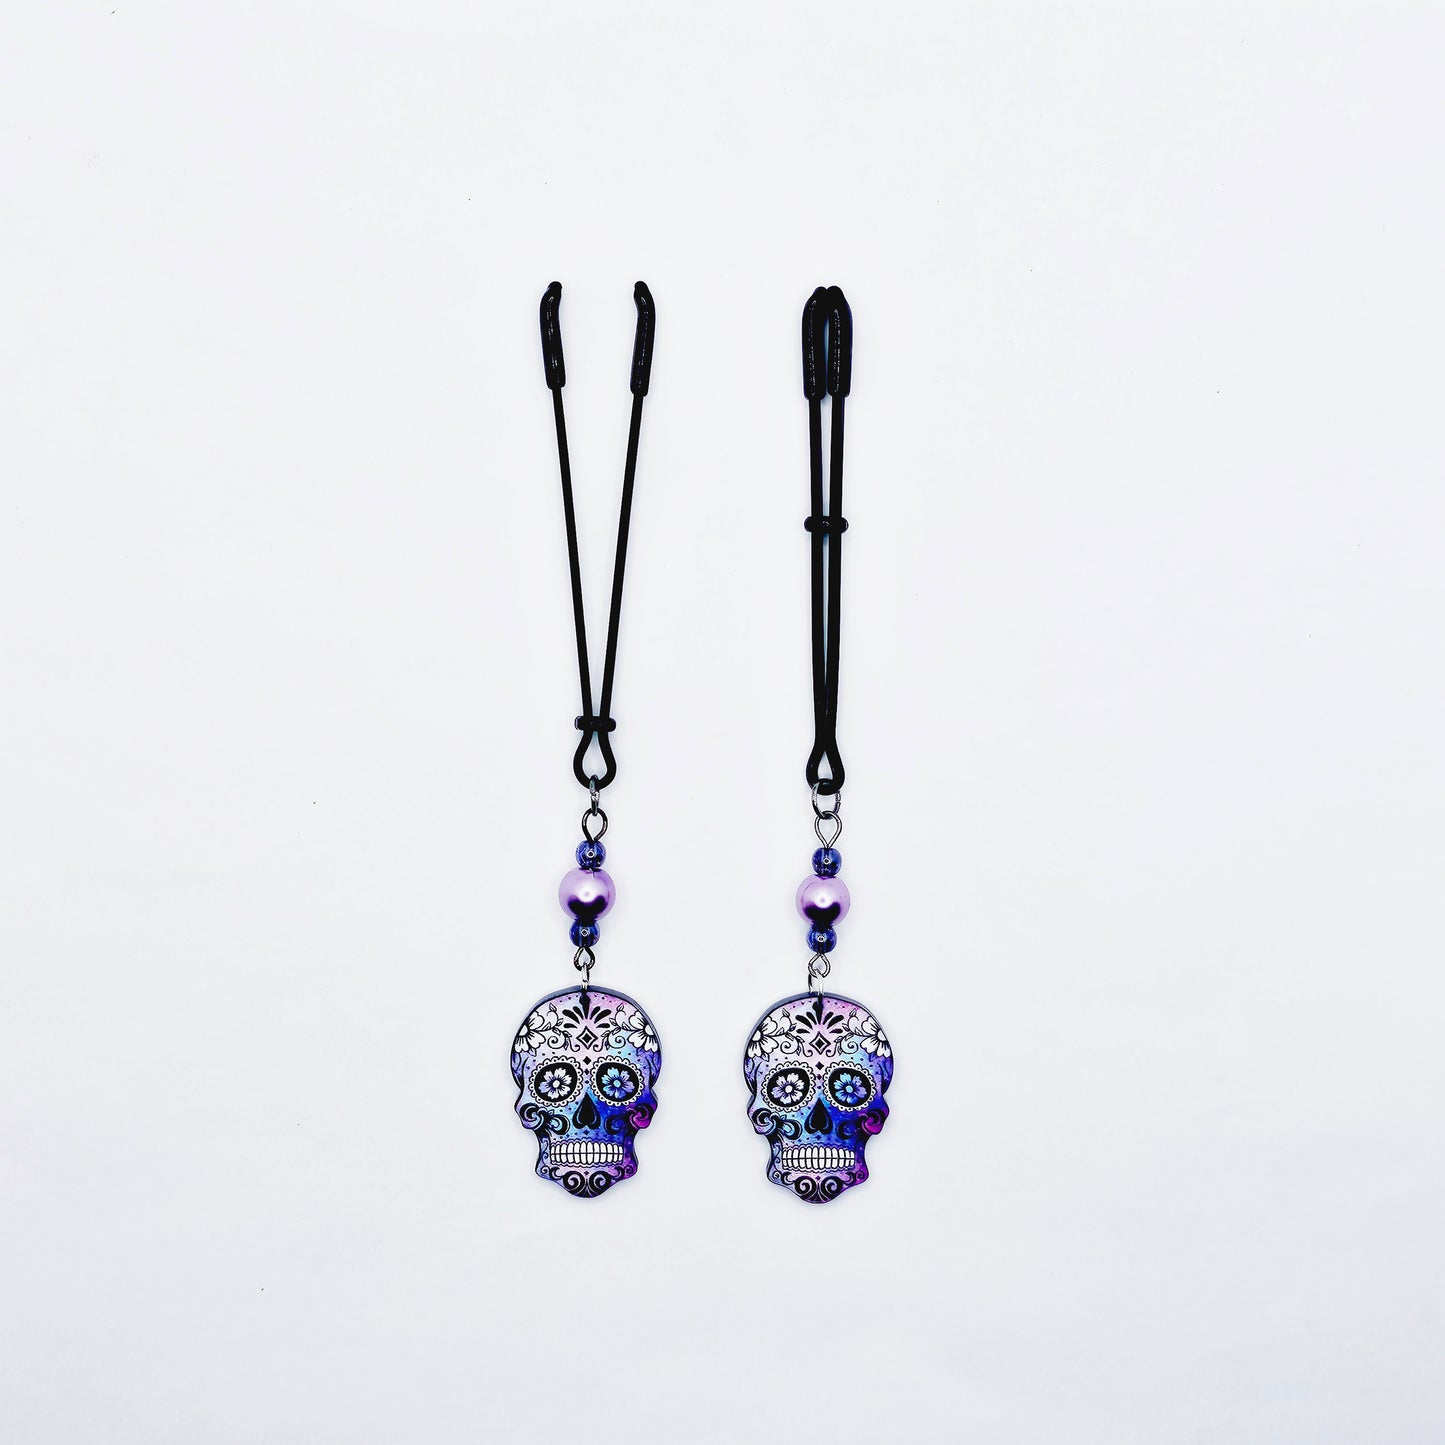 Sugar Skull Nipple Clamps. Black Tweezer Nipple Clamps with Pretty Pearl Beads and Skulls.